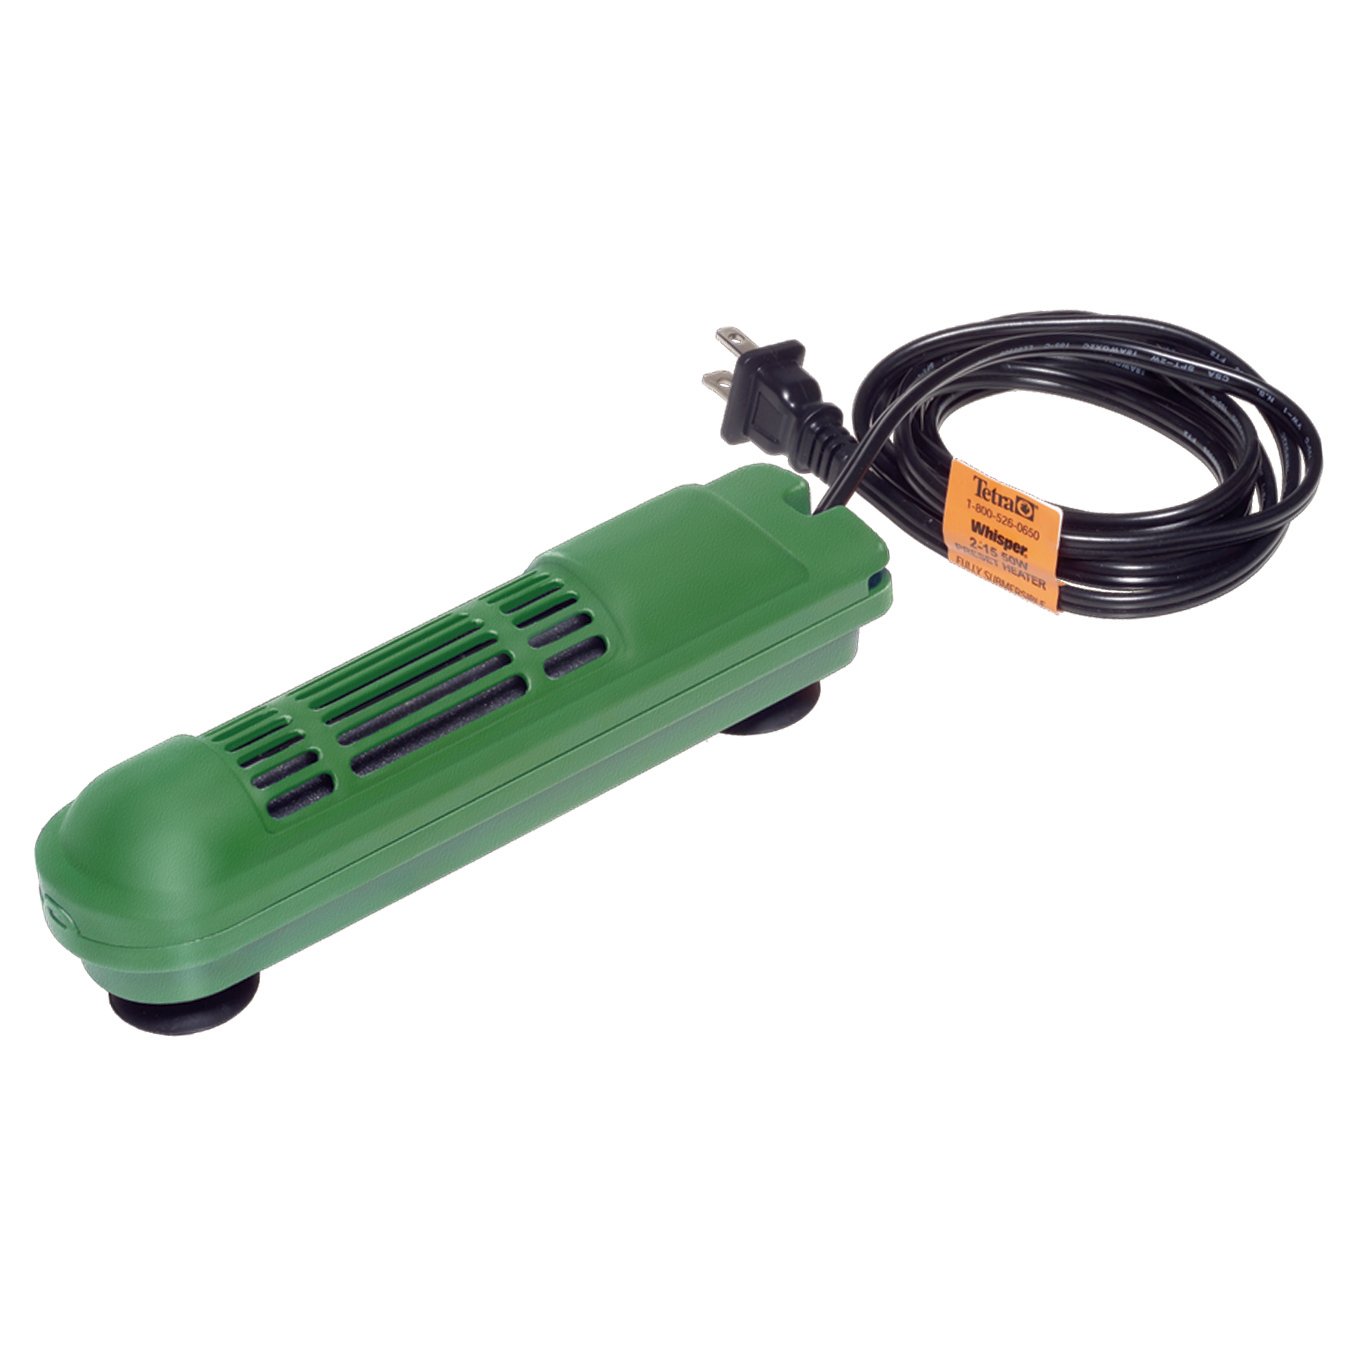 Tetra 26445 Fauna Aquatic Reptile Heater For Frogs, Newts & Turtles, 100 Watt (Green) $8.23 + Free Shipping w/ Prime or on $35+